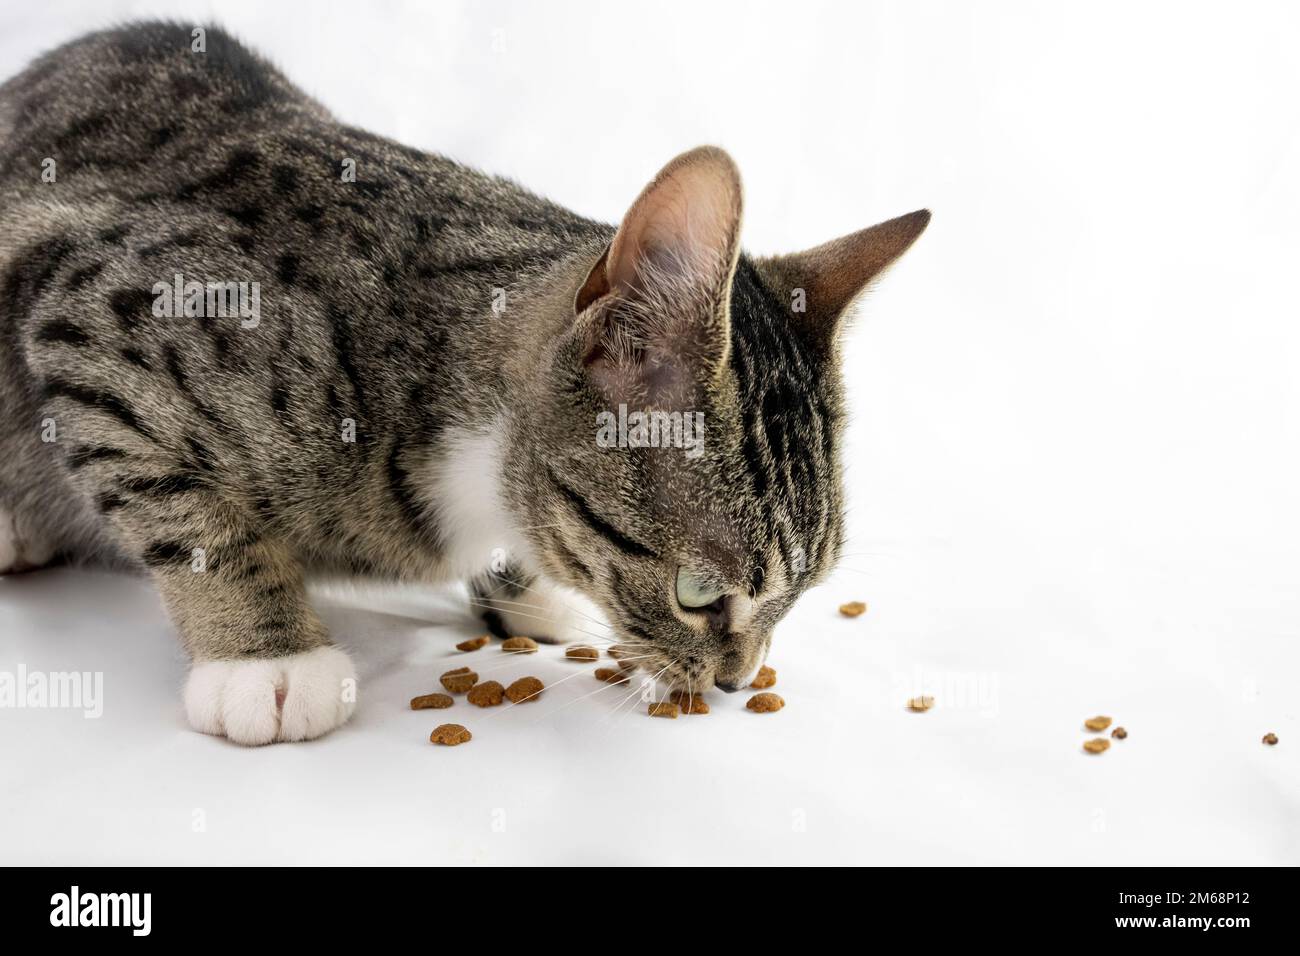 Pet diet and nutrition showing a cat eating food on white background Stock Photo